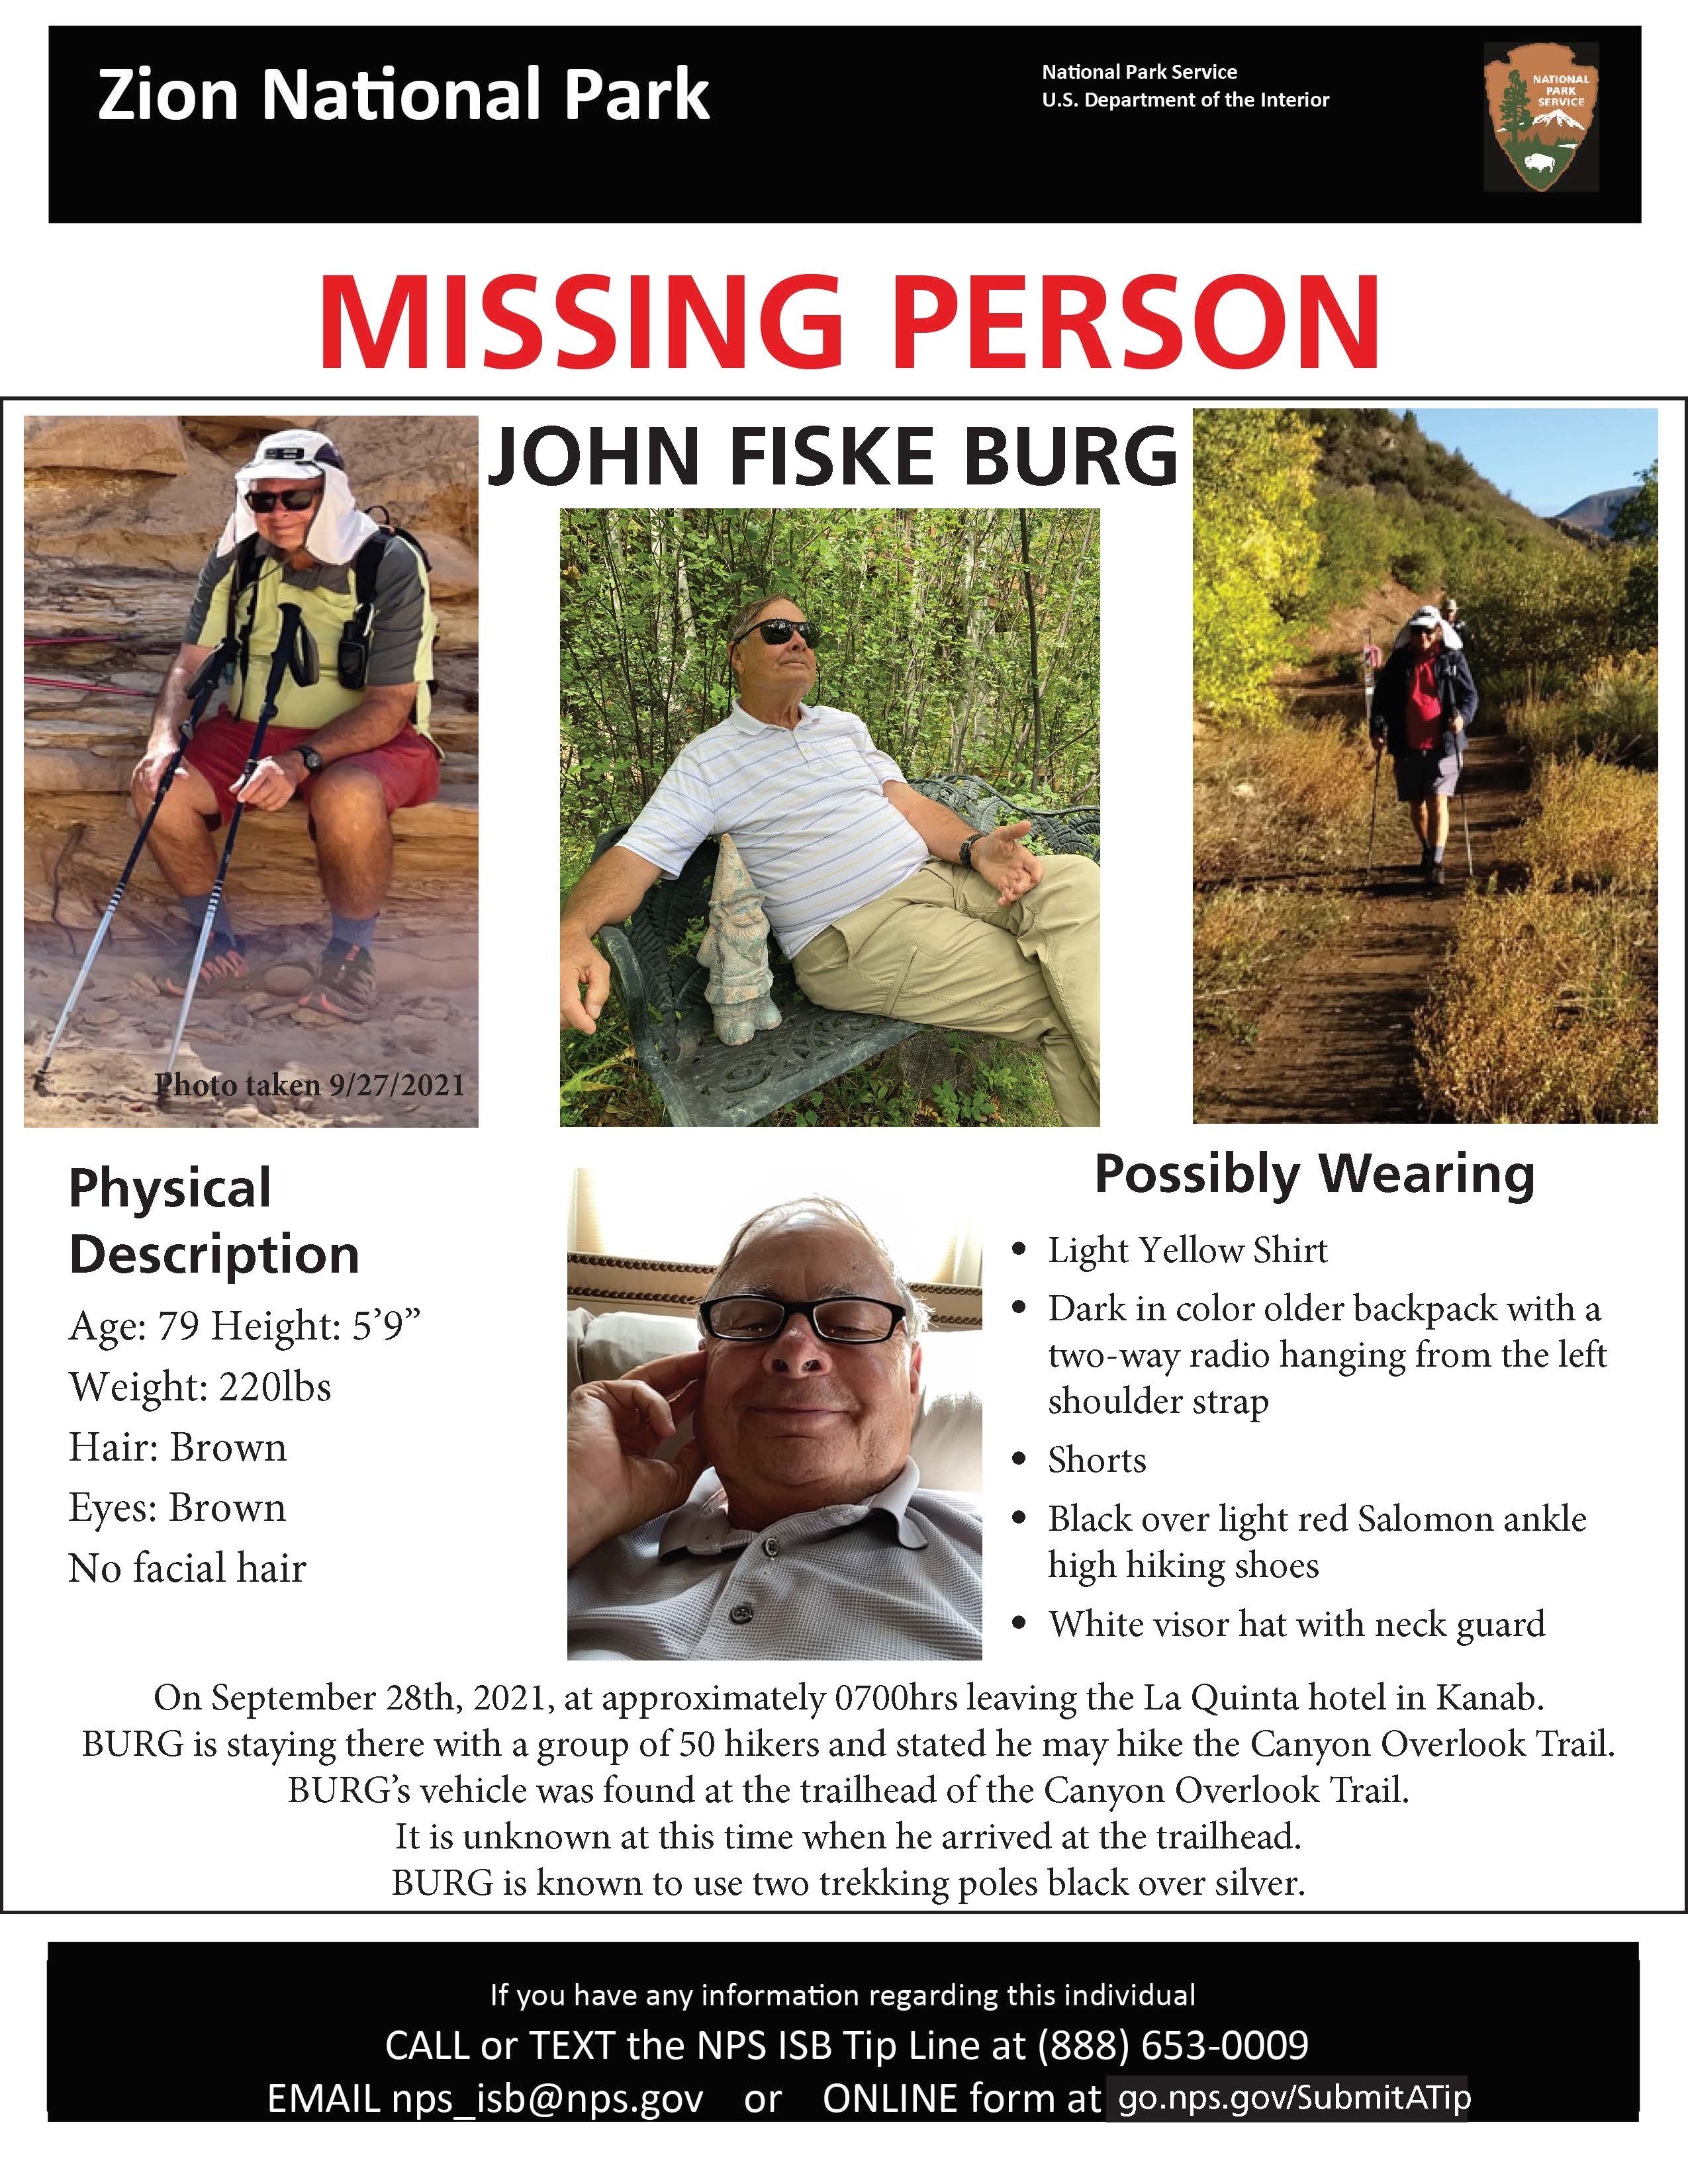 On Friday, October 1, Search and Rescue operations at Zion National Park for missing hiker John Fiske Burg are ongoing.